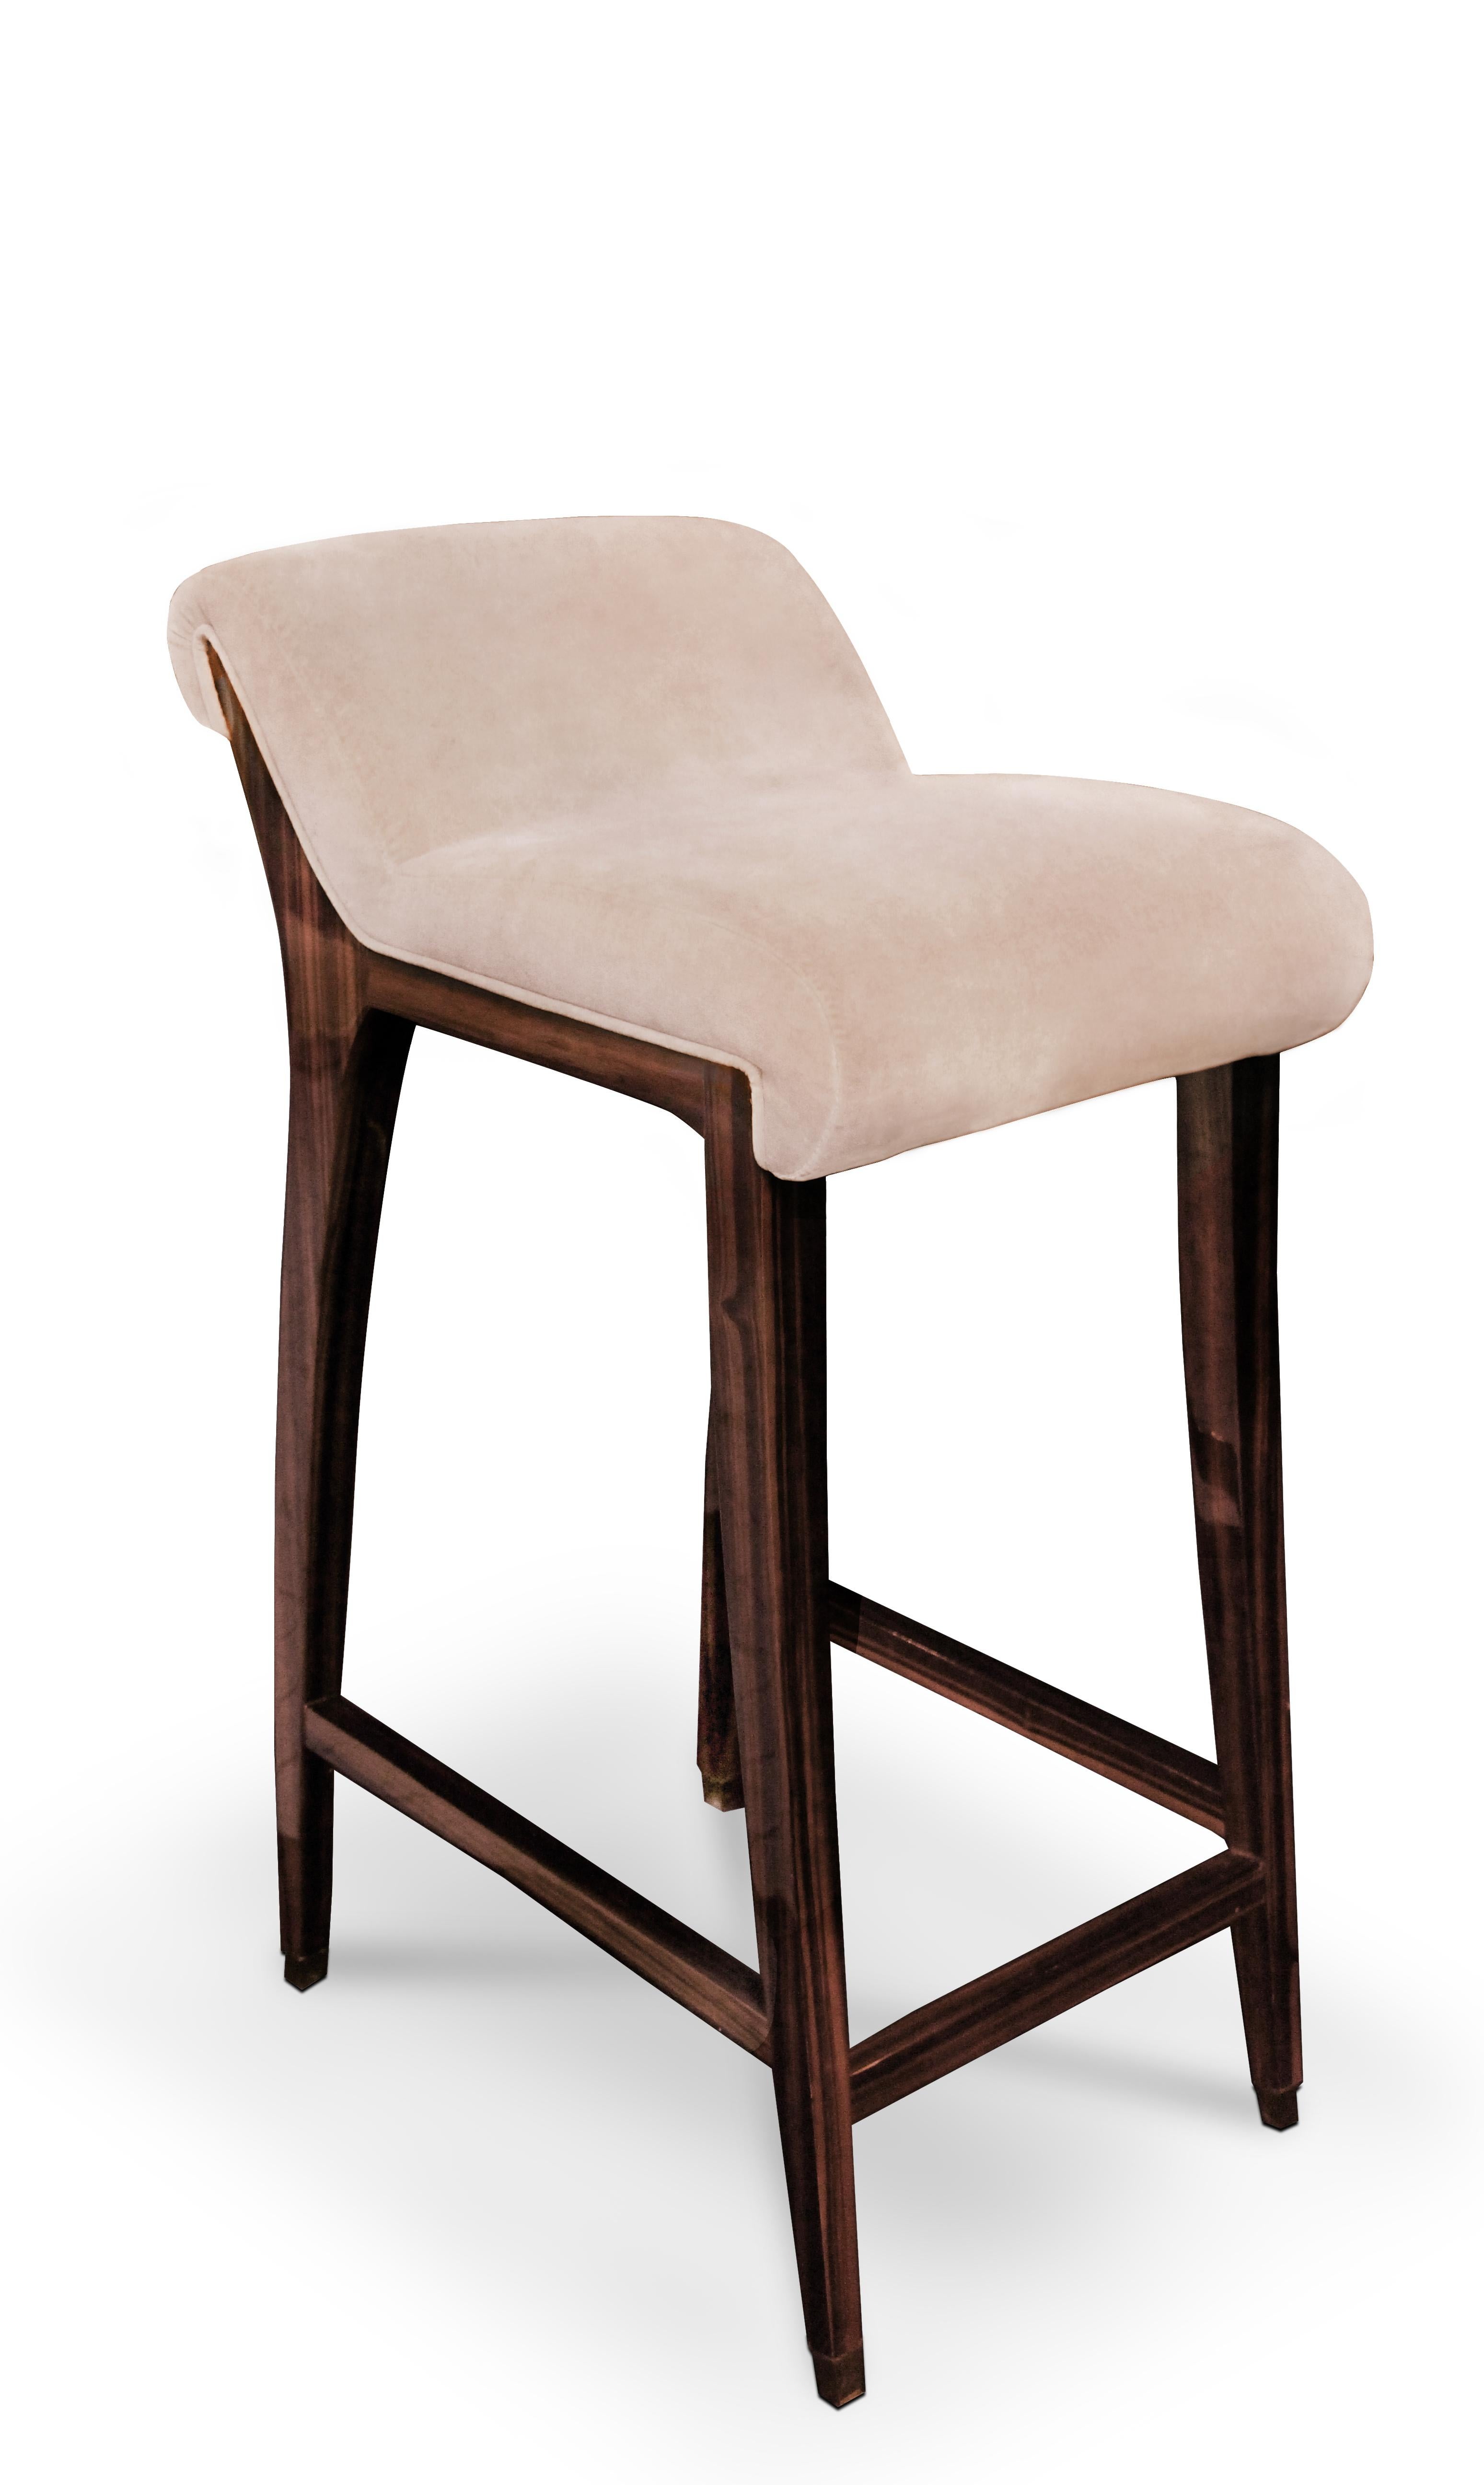 Enticing simplicity is exemplified in this fluid and gracious bar stool. Chartreuse rippled fabric combine with the rich ebony veneer complete a stunning masterpiece.

Options
Upholstery: Available in any fabric from the Koket textiles collection or